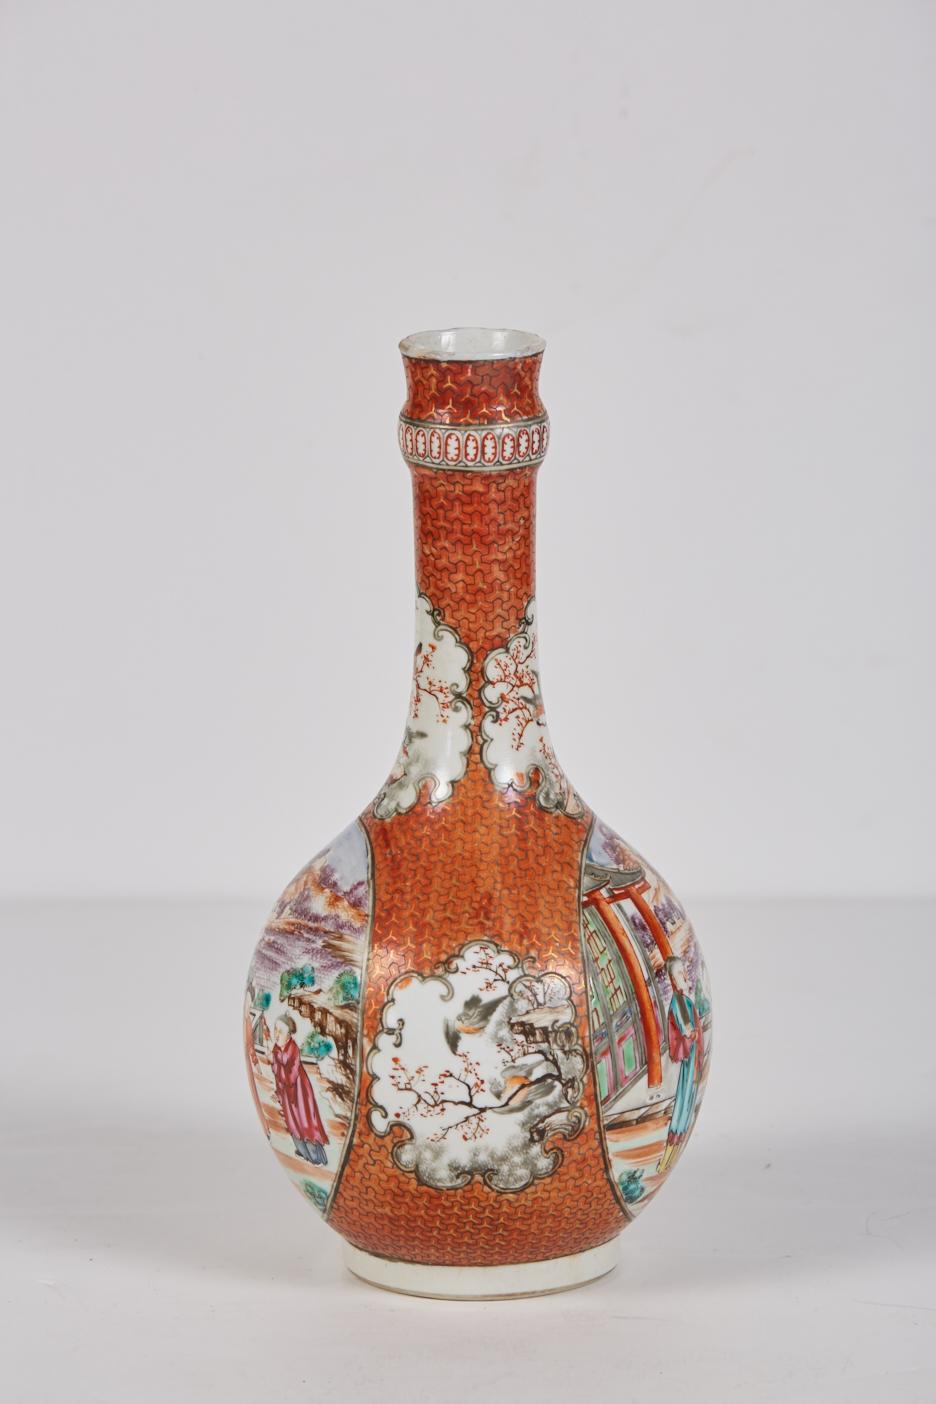 Chinese export porcelain gugglet hand decorated in polychrome Mandarin pattern having gilt accent over iron red background. Large reserves, front and back, present different figural scenes. Smaller intricately shaped reserves between the two larger